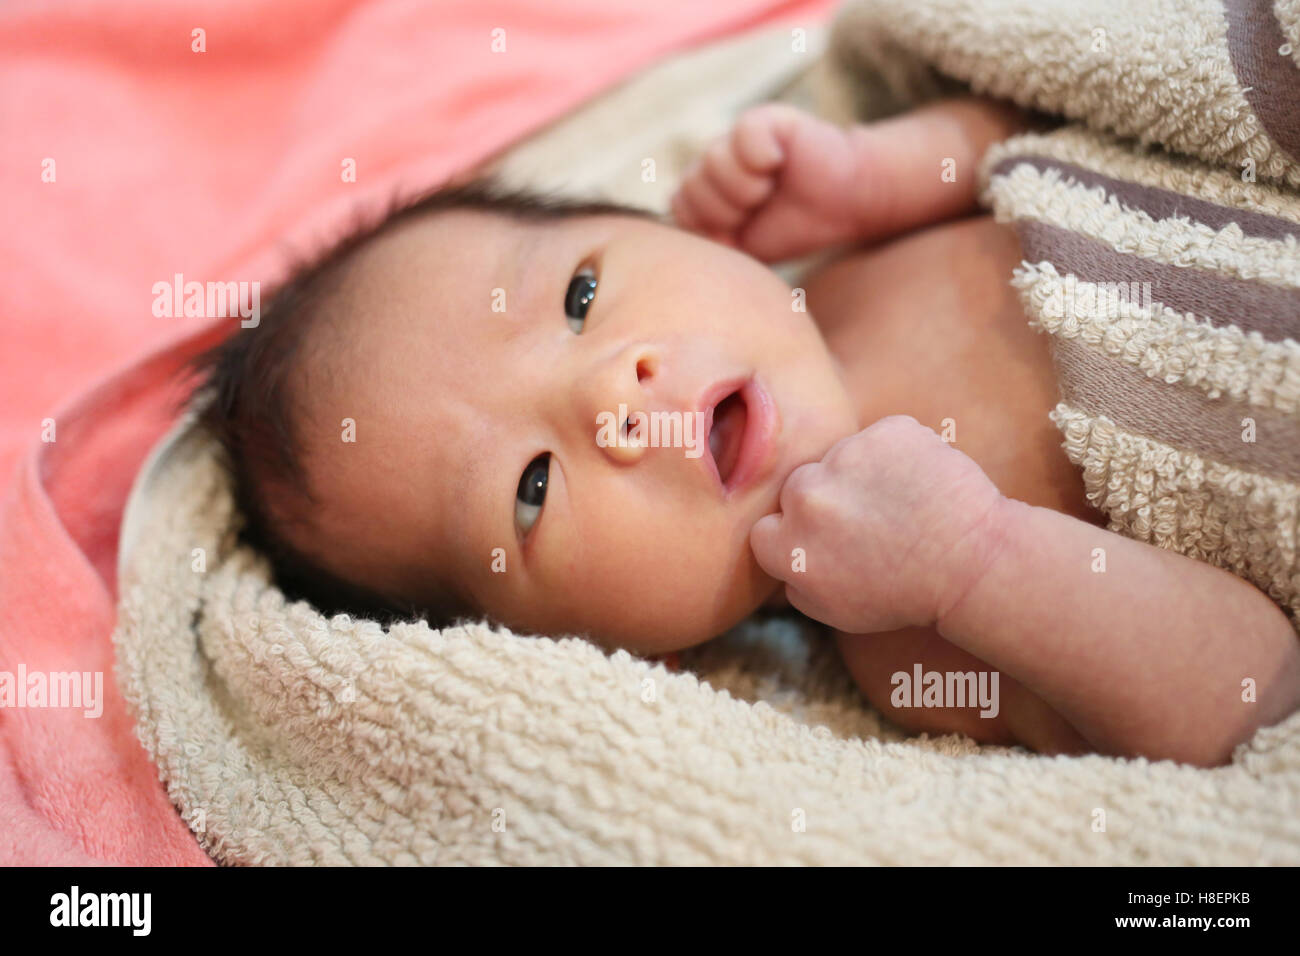 suspicious baby boy facial expressions on the bed,Asian boy in Thailand. Stock Photo